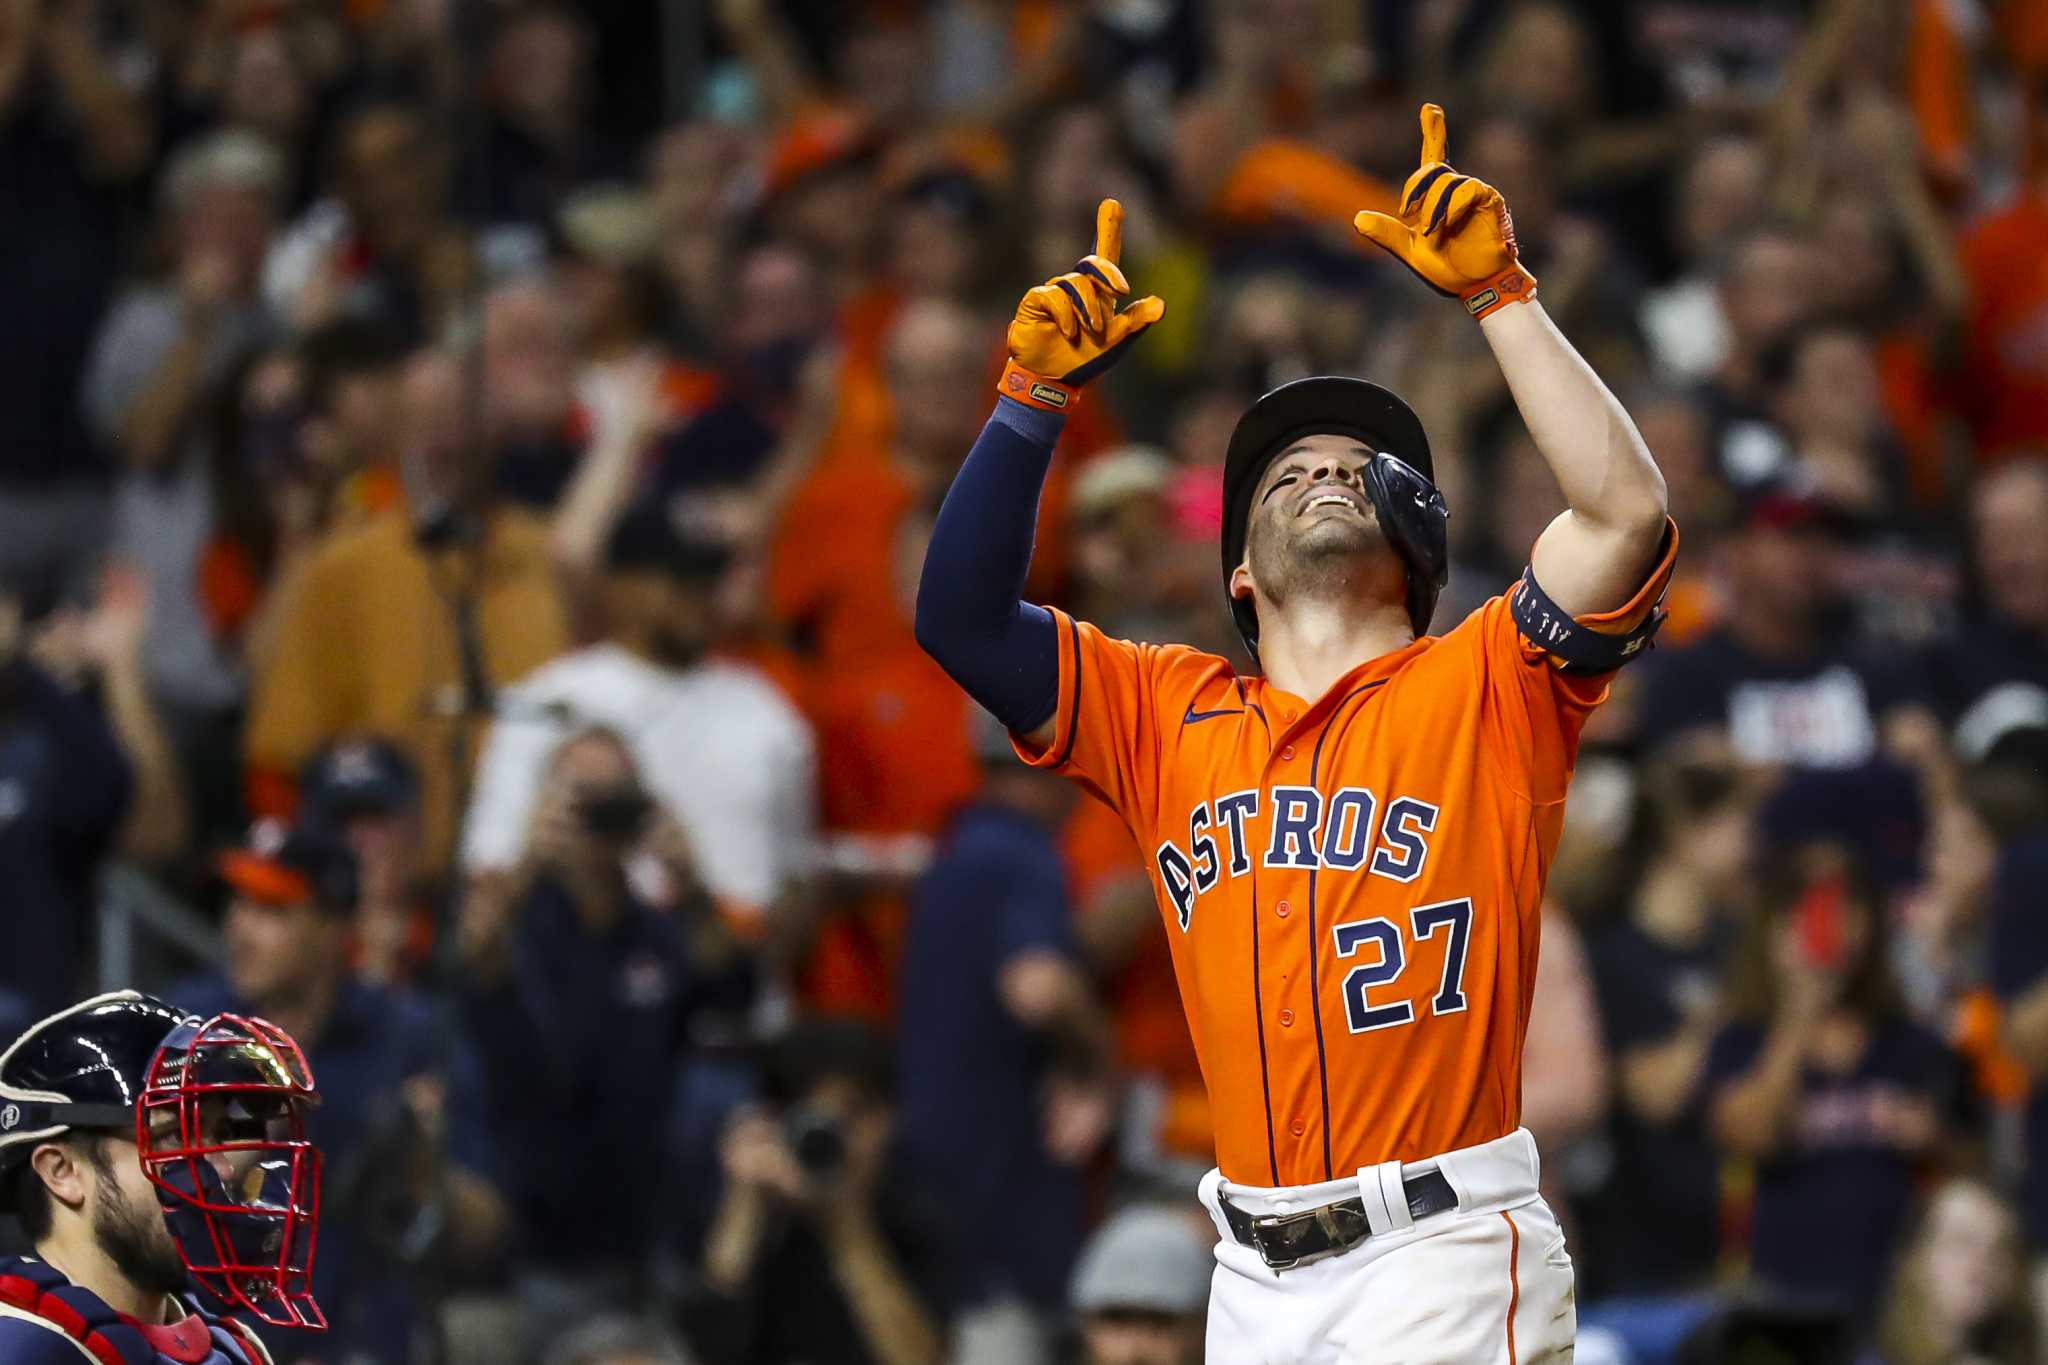 Jose Altuve powers Astros to 7-2 win over Braves in Game 2 of the